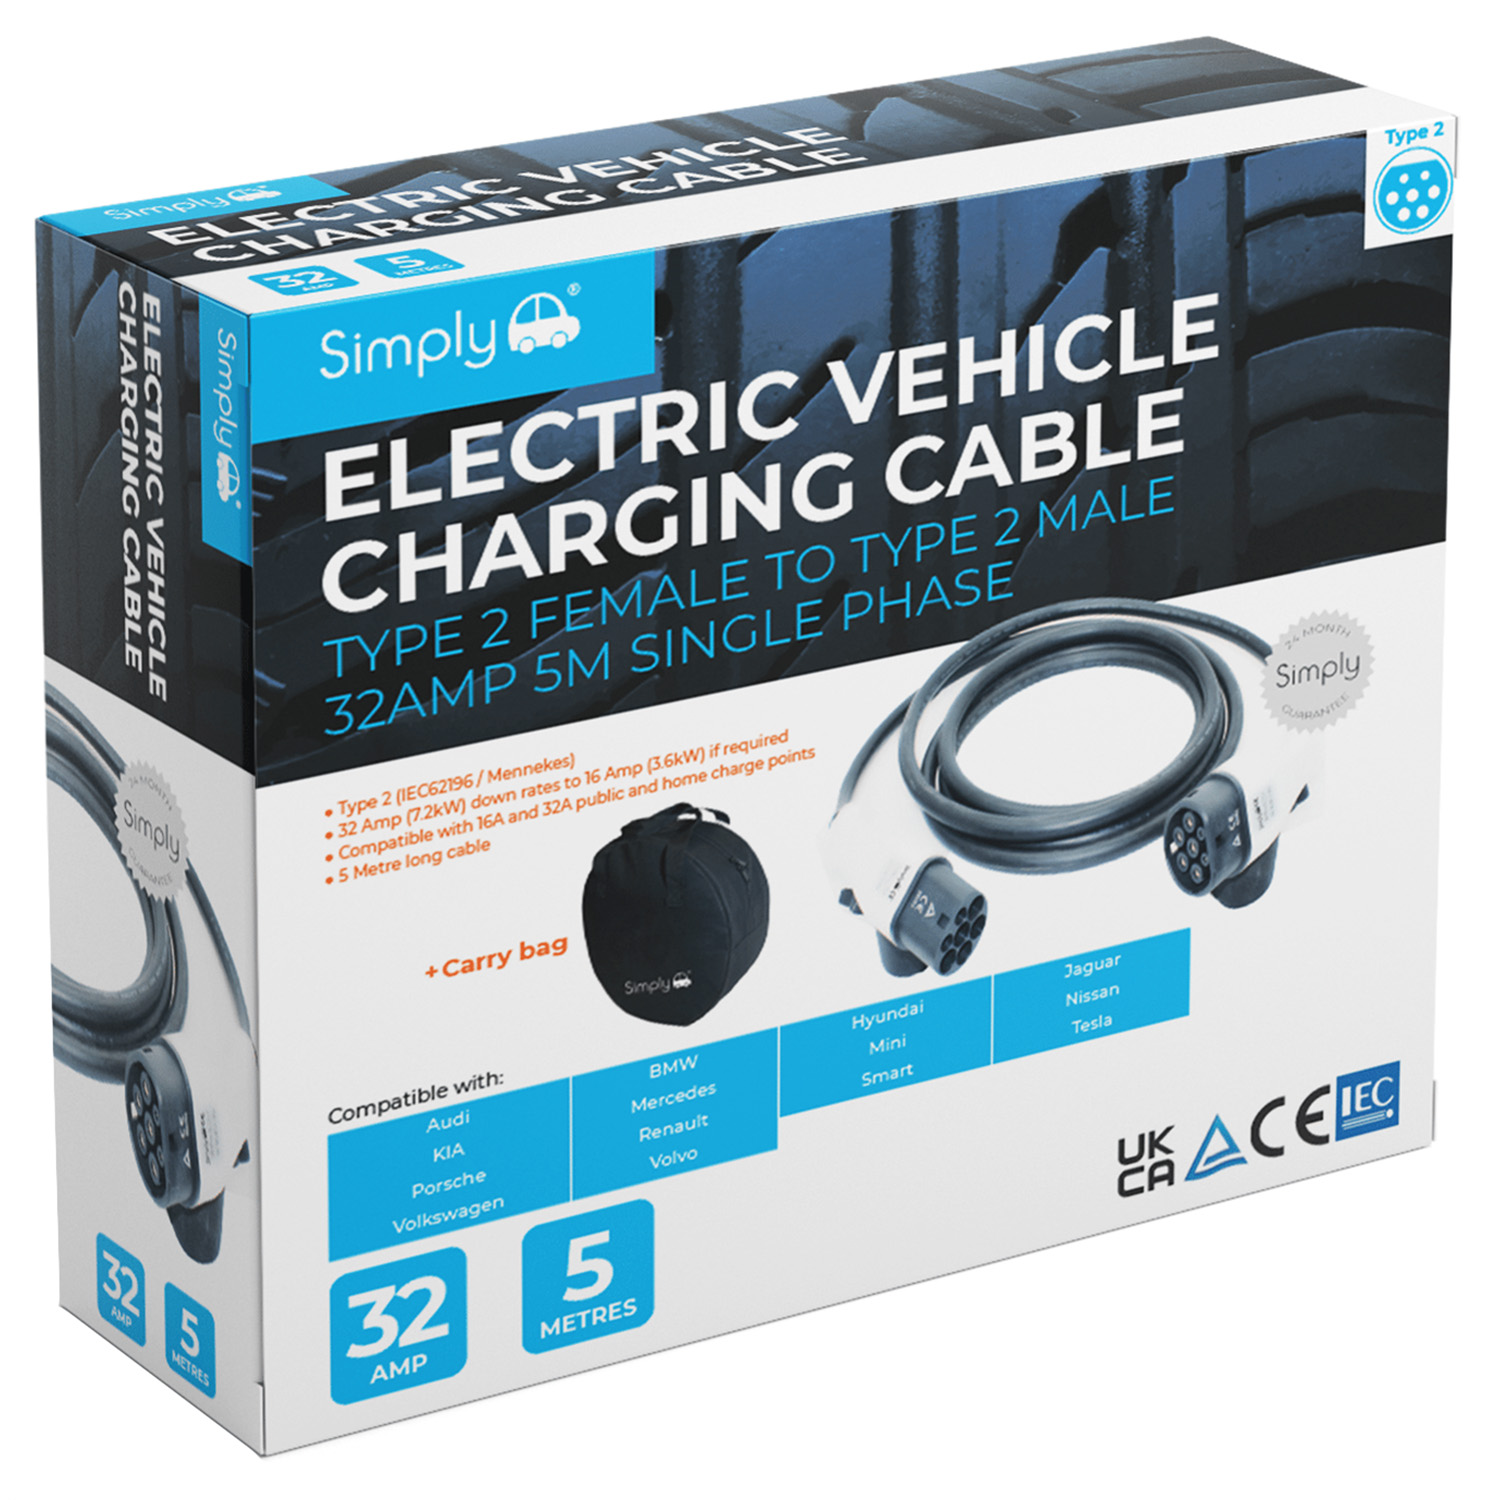 Electric Vehicle Charging Cable - Type 2 F to Type 2 M (Single Phase) Image 1